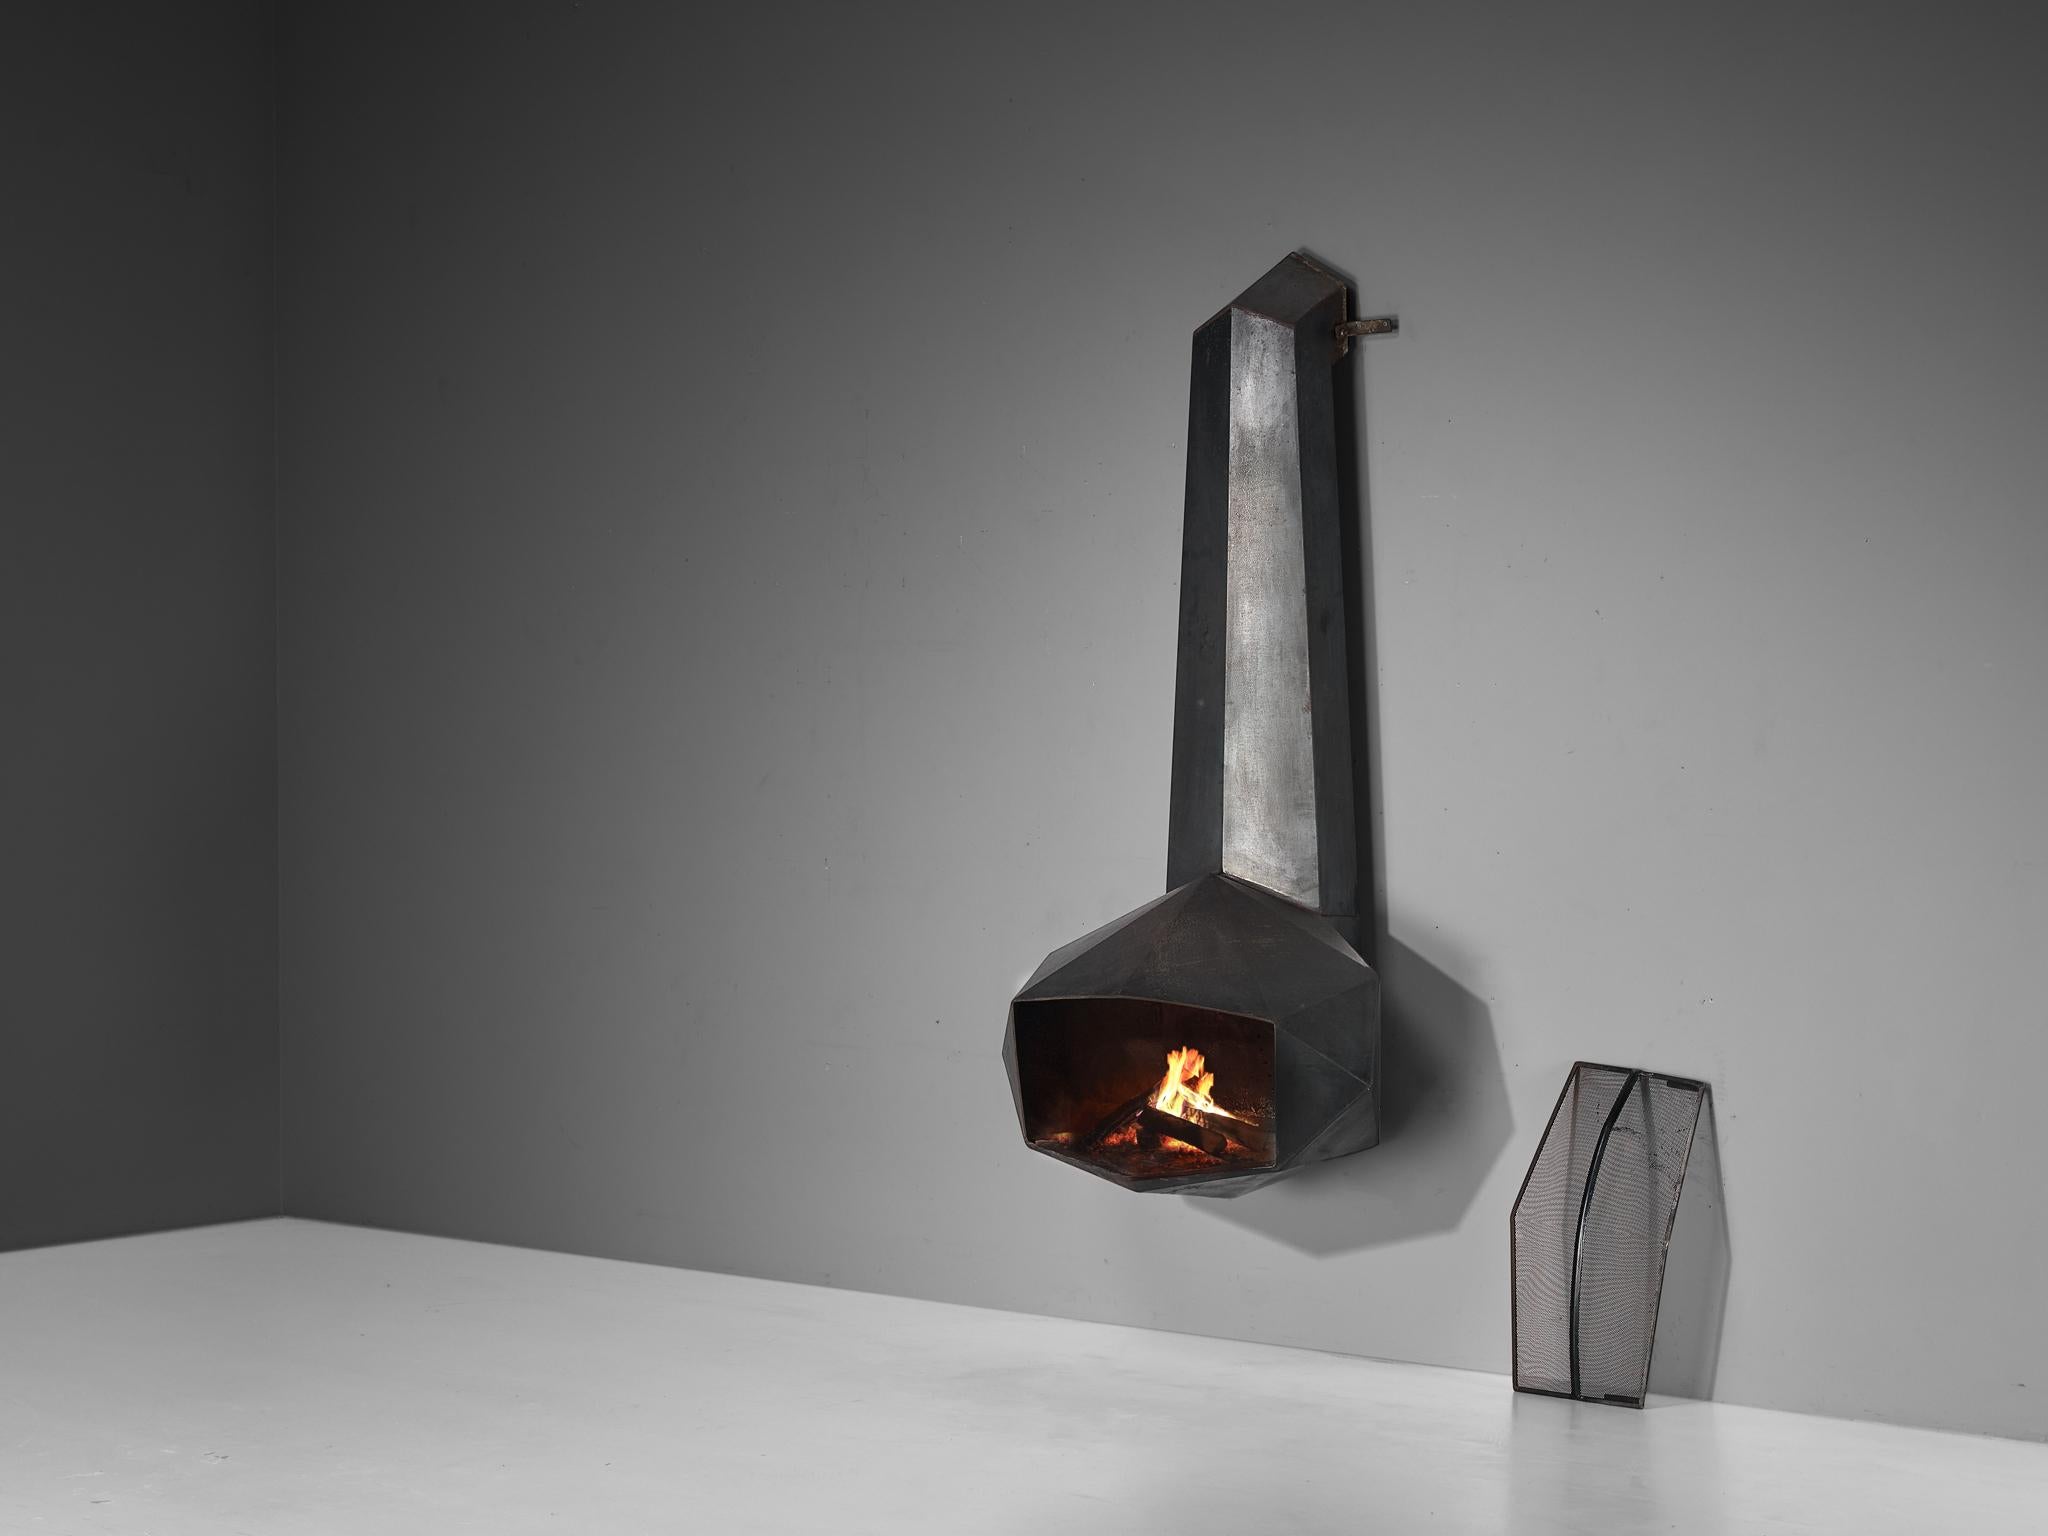 Donbar fireplace, iron, Belgium, 1970s

Transport yourself back to the bold and avant-garde spirit of the 1970s with this fireplace by Donbar made in Belgium in the 1970s. Crafted from patinated black iron, this masterpiece boasts a mesmerizing